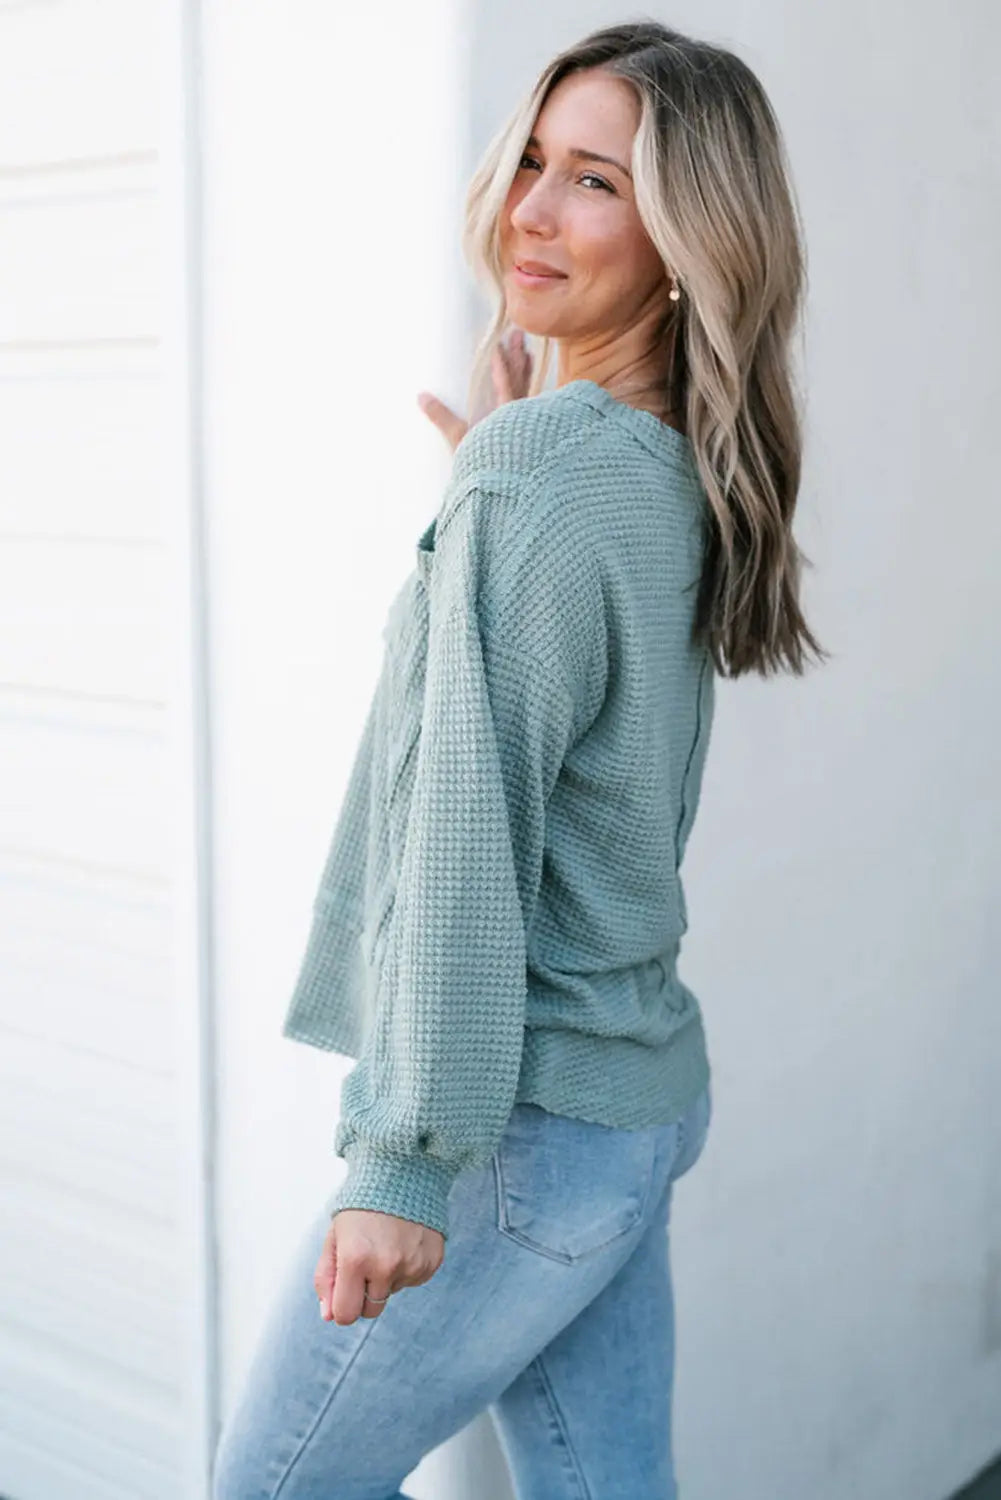 Mist blue raw edge detail waffle knit v neck top - tops